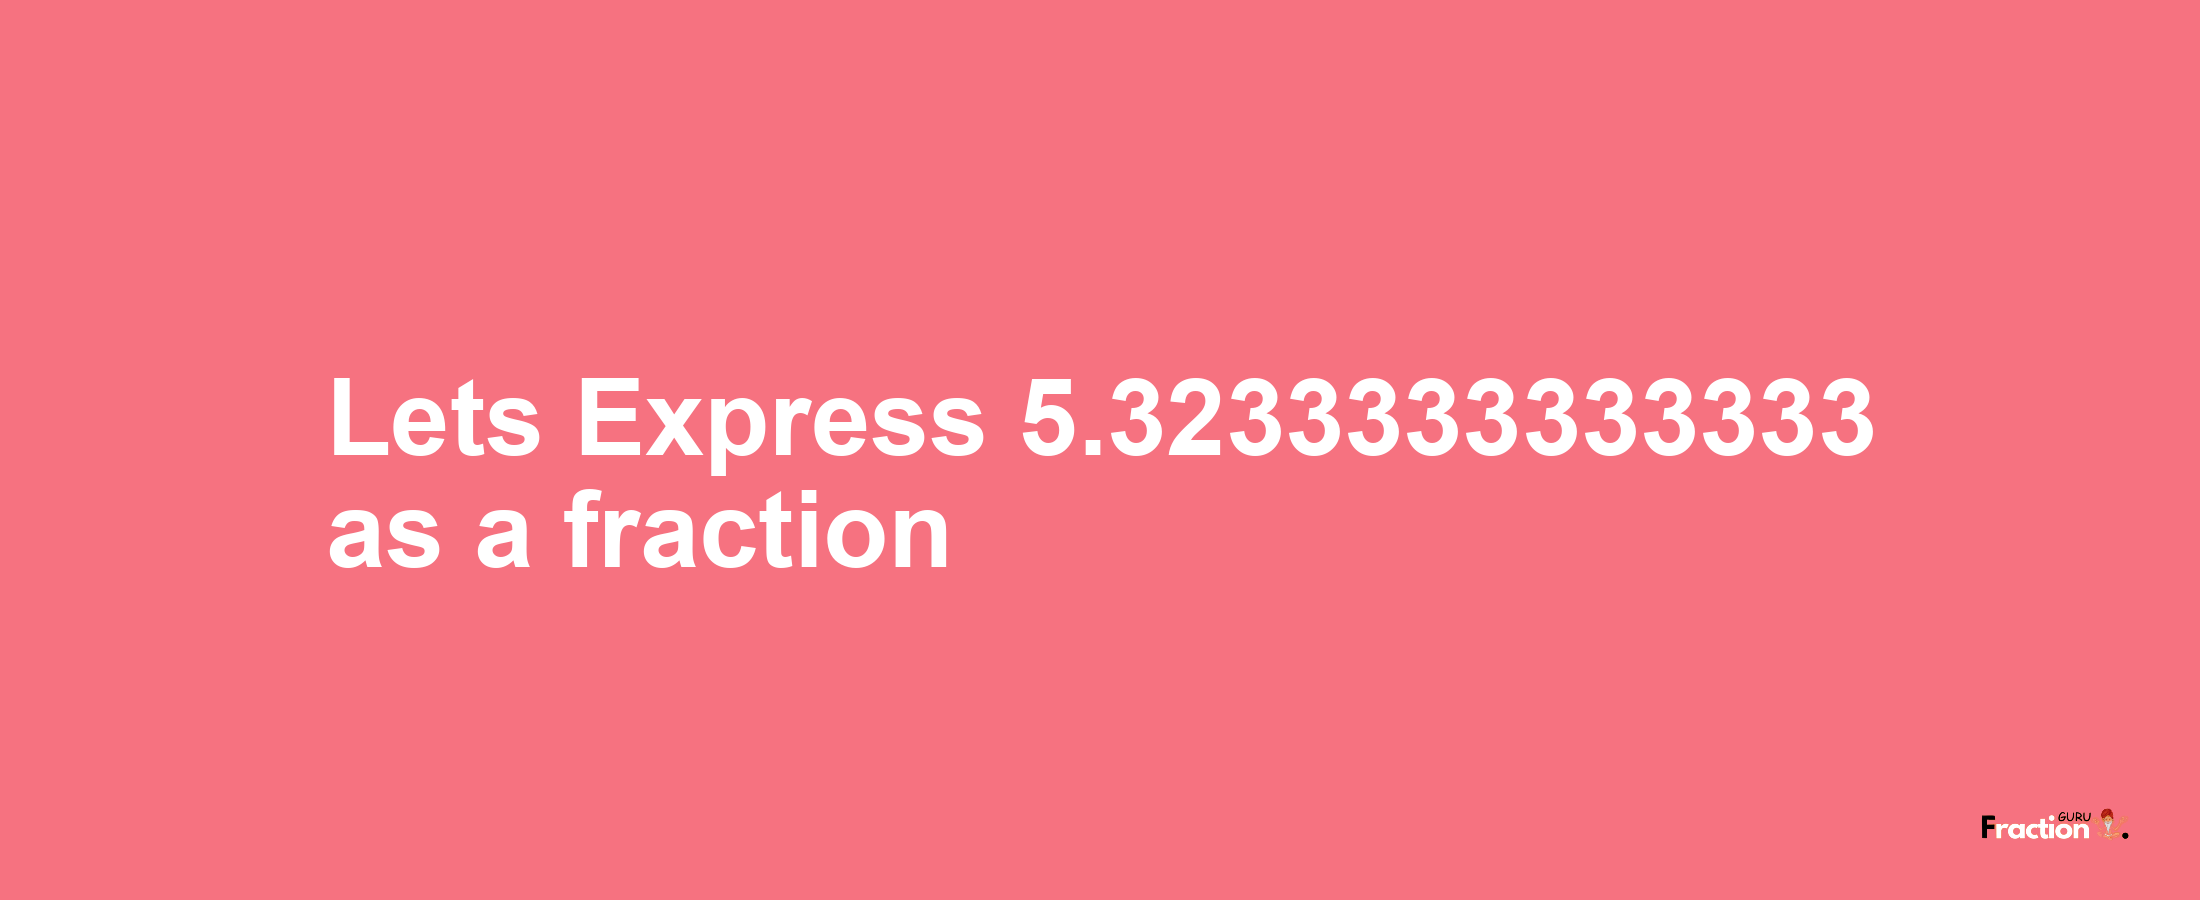 Lets Express 5.3233333333333 as afraction